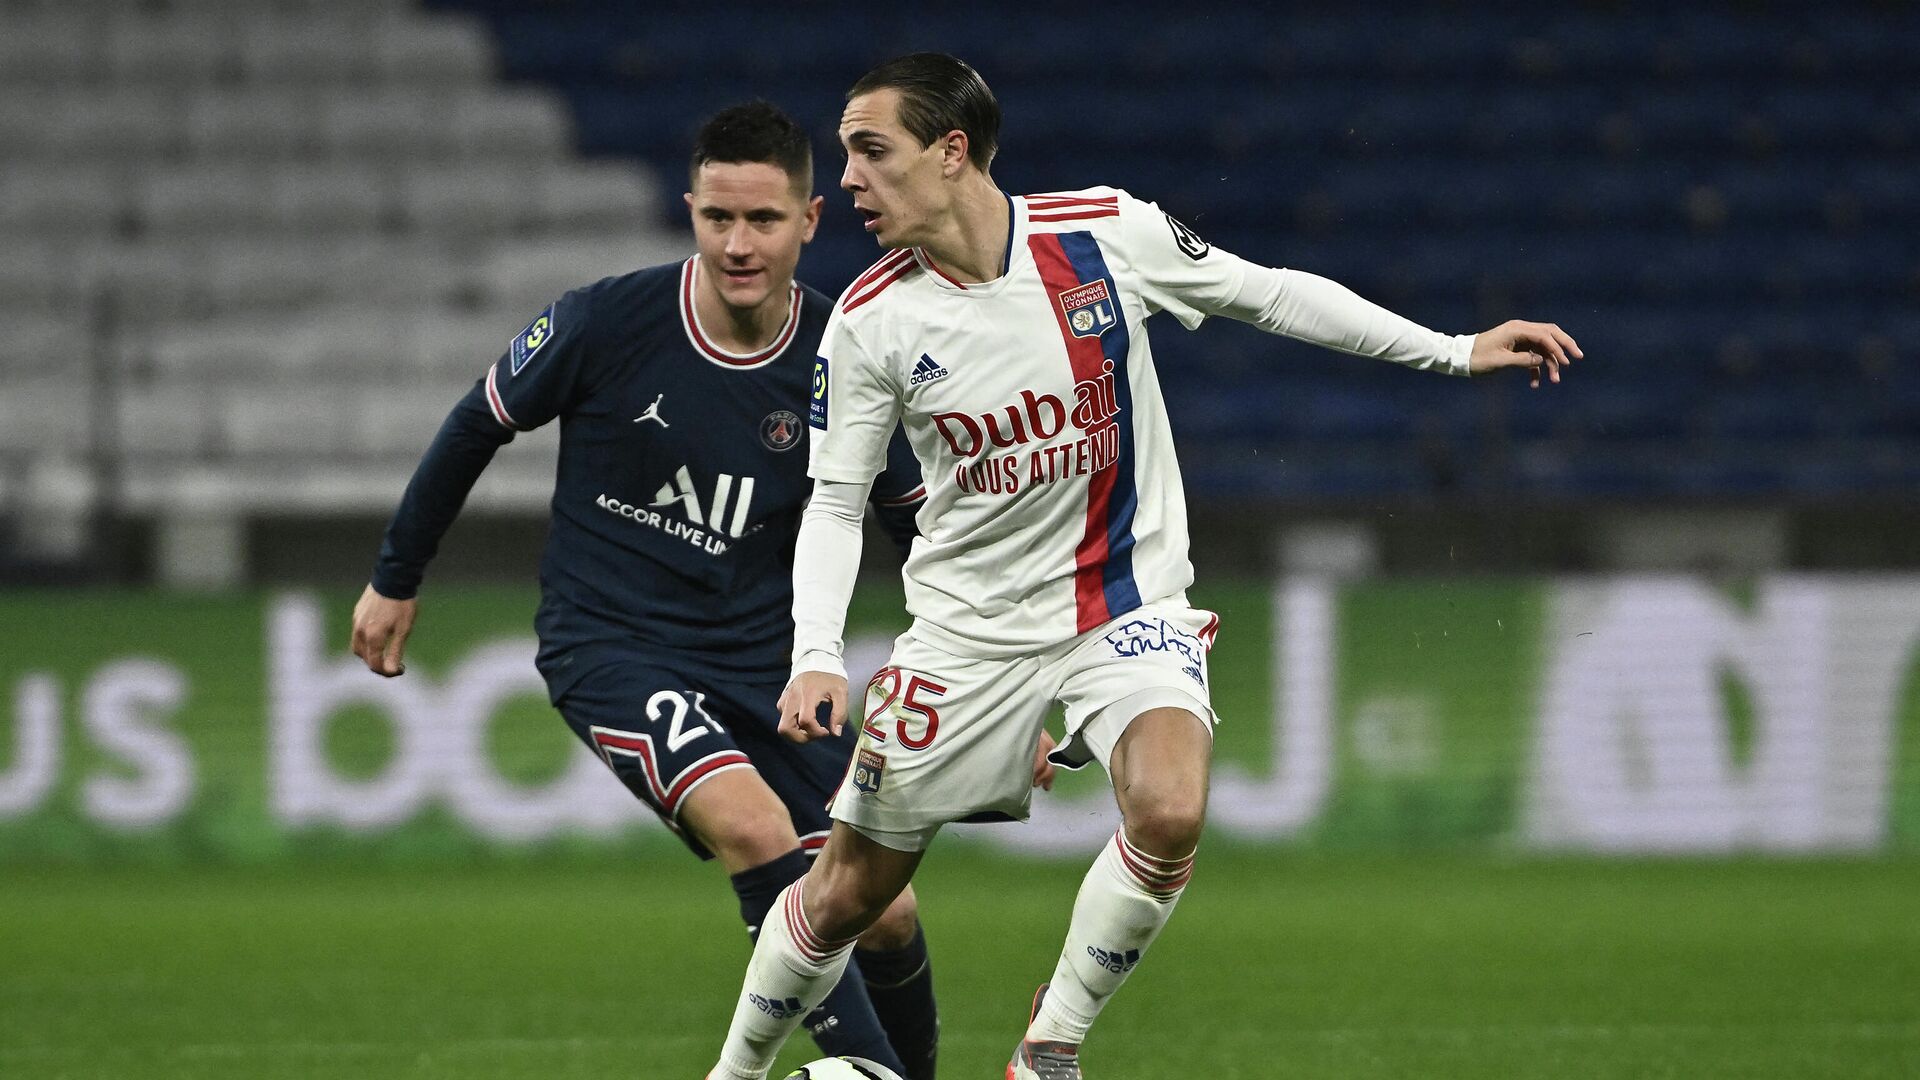 Lyon's French defender Damien Da Silva (L) challenges Paris Saint-Germain's Portuguese defender Nuno Mendes during the French L1 football match between Olympique Lyonnais and Paris Saint-Germain at the Groupama stadium in Decines-Charpieu near Lyon, central eastern France on January 9, 2022. (Photo by Jeff PACHOUD / AFP) - РИА Новости, 1920, 10.01.2022